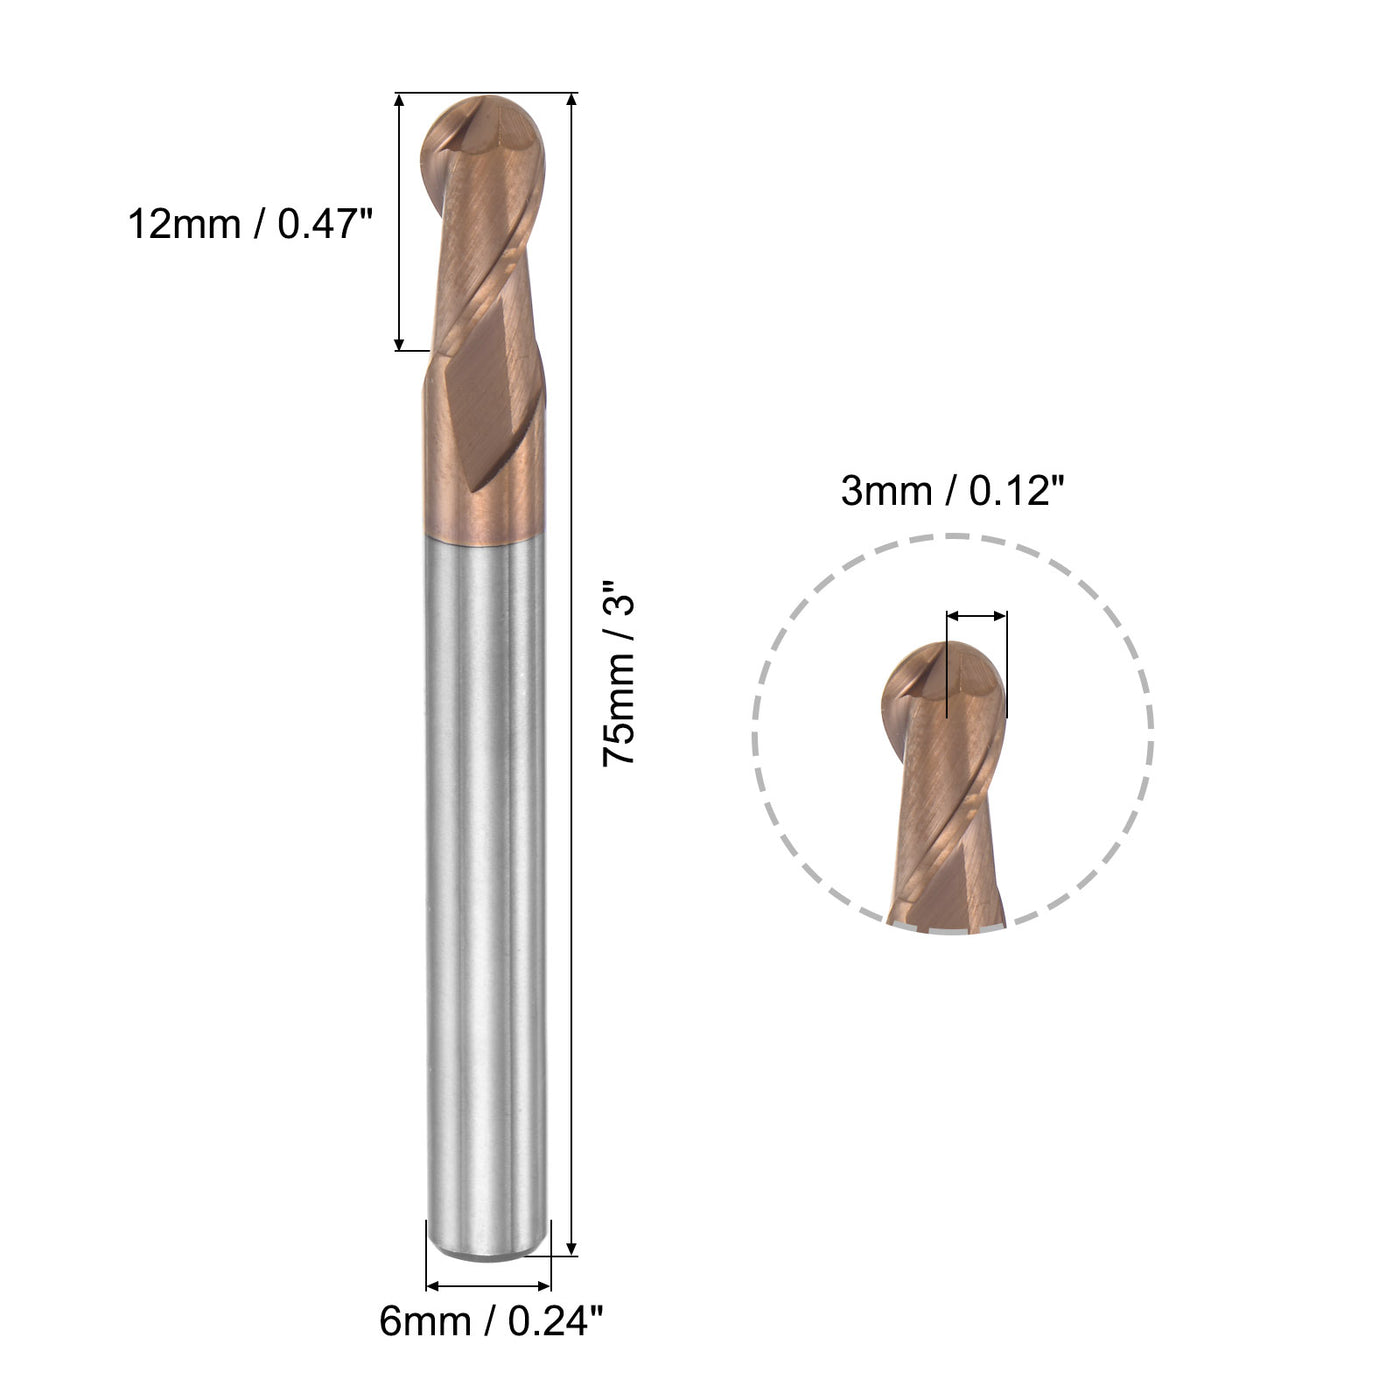 uxcell Uxcell 3mm Radius 75mm Long HRC55 Carbide AlTiSin Coated 2 Flute Ball Nose End Mill